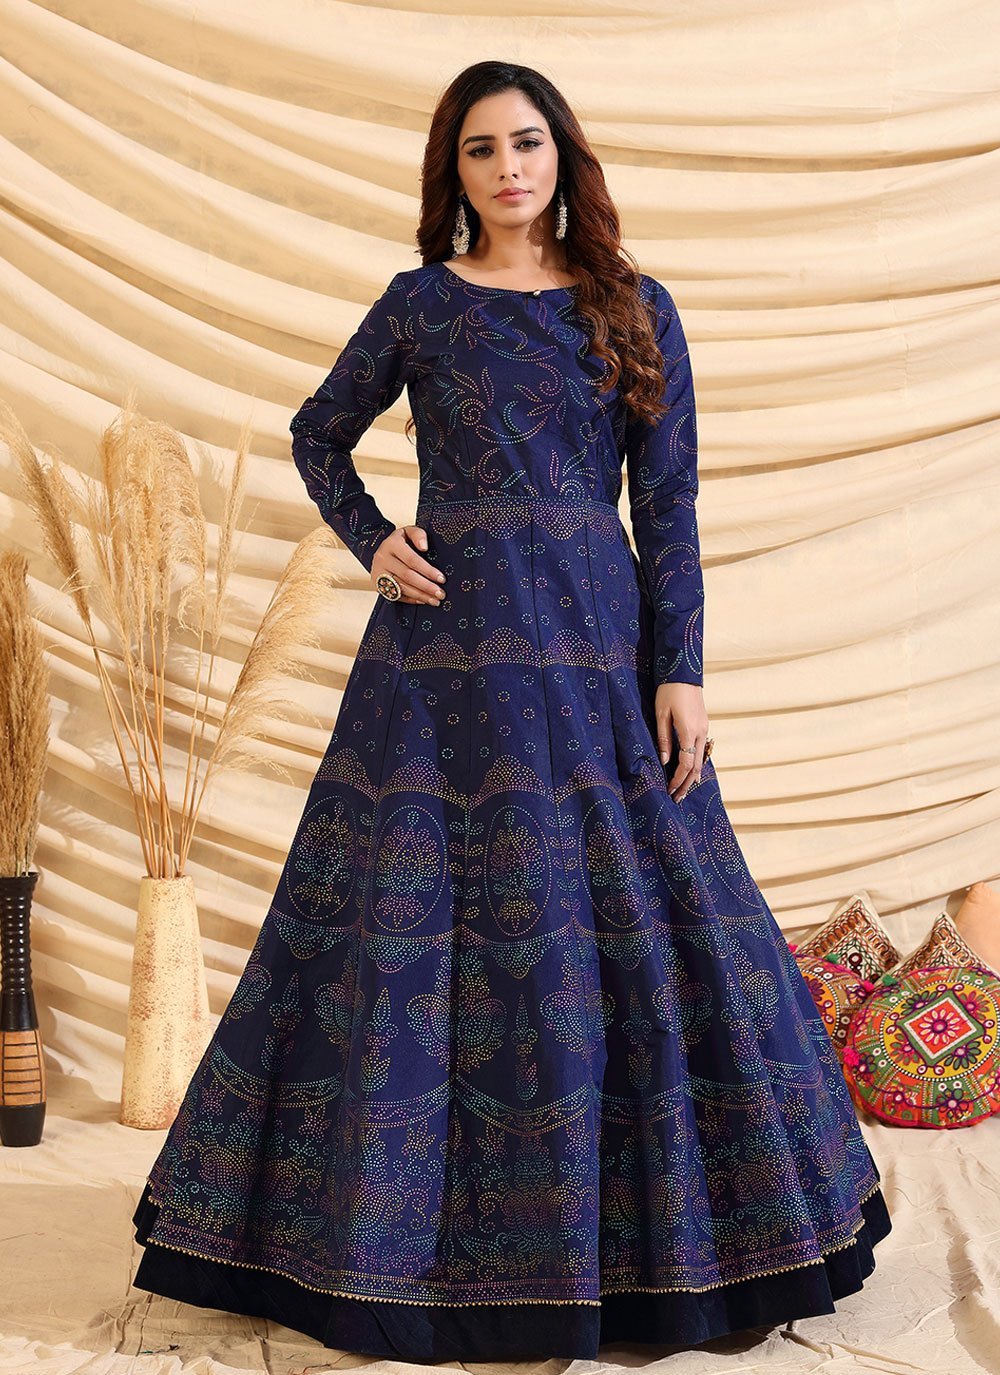 Navy Blue Color Velvet Gown for Women Indian Traditional Dress Wedding  Bridal Anarkali Suit Designer Partywear Gown Bridesmaid Gown, RR-5626 - Etsy